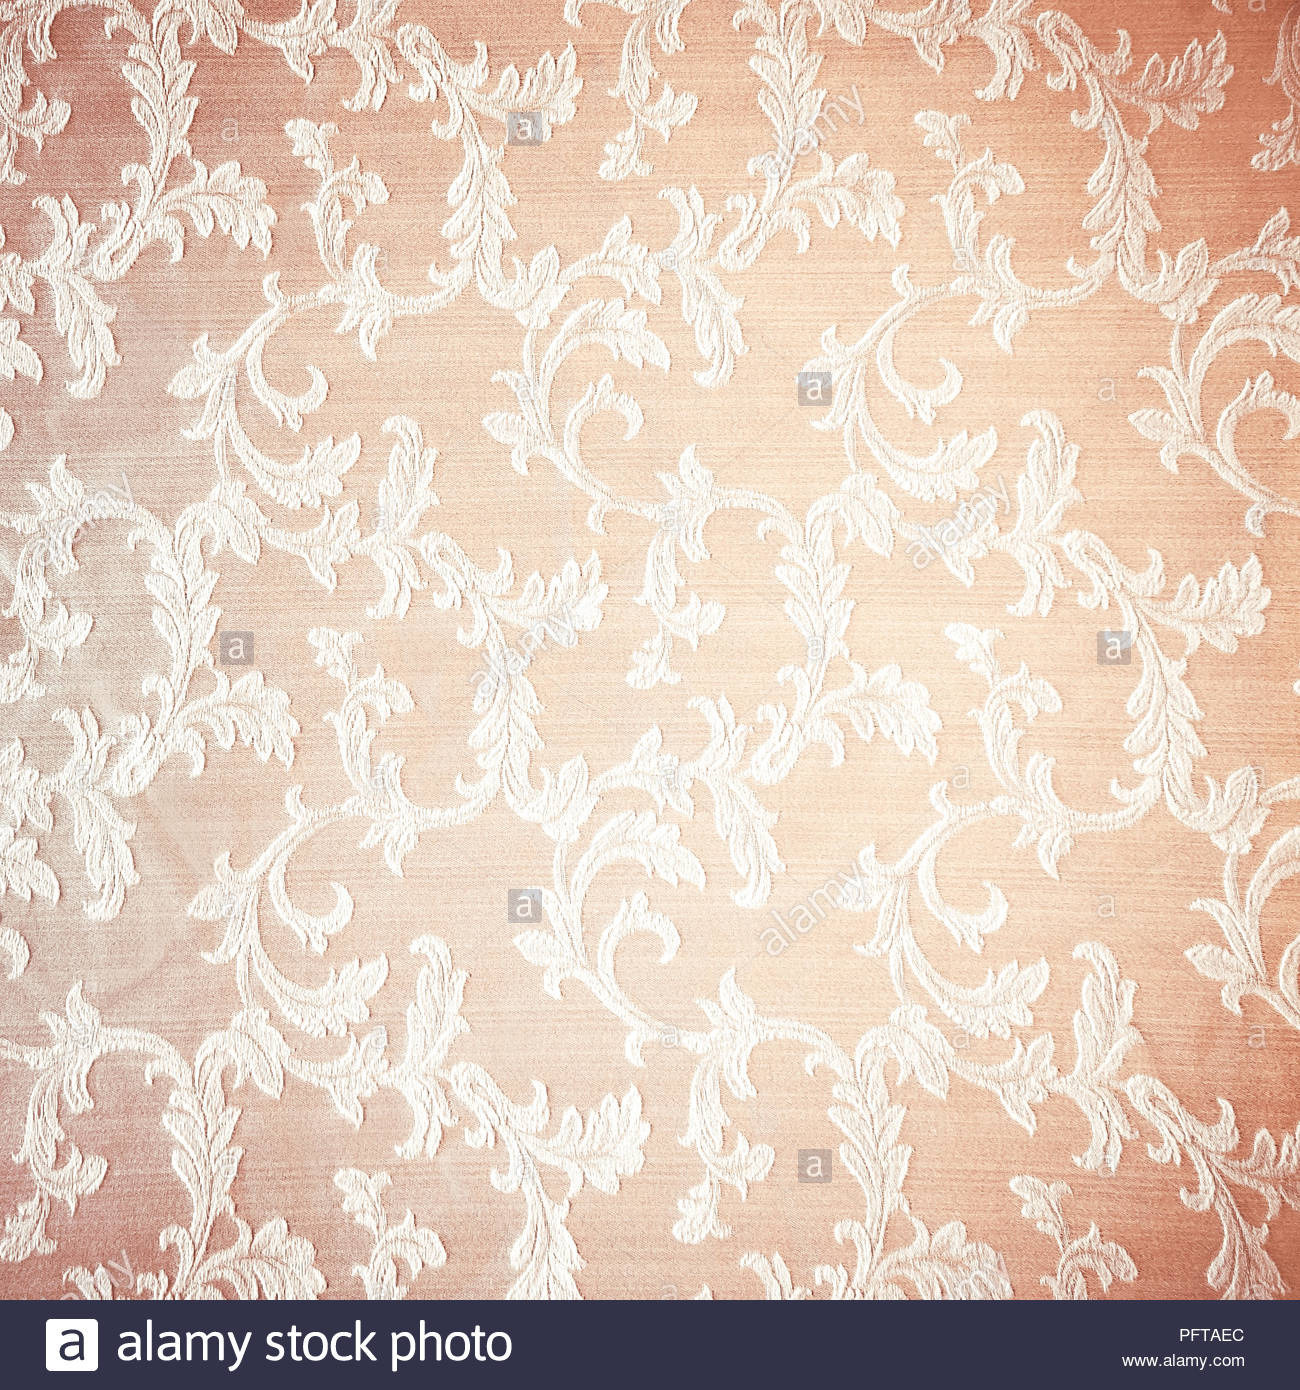 Retro Floral Curtains Background Abstract Beige Textured